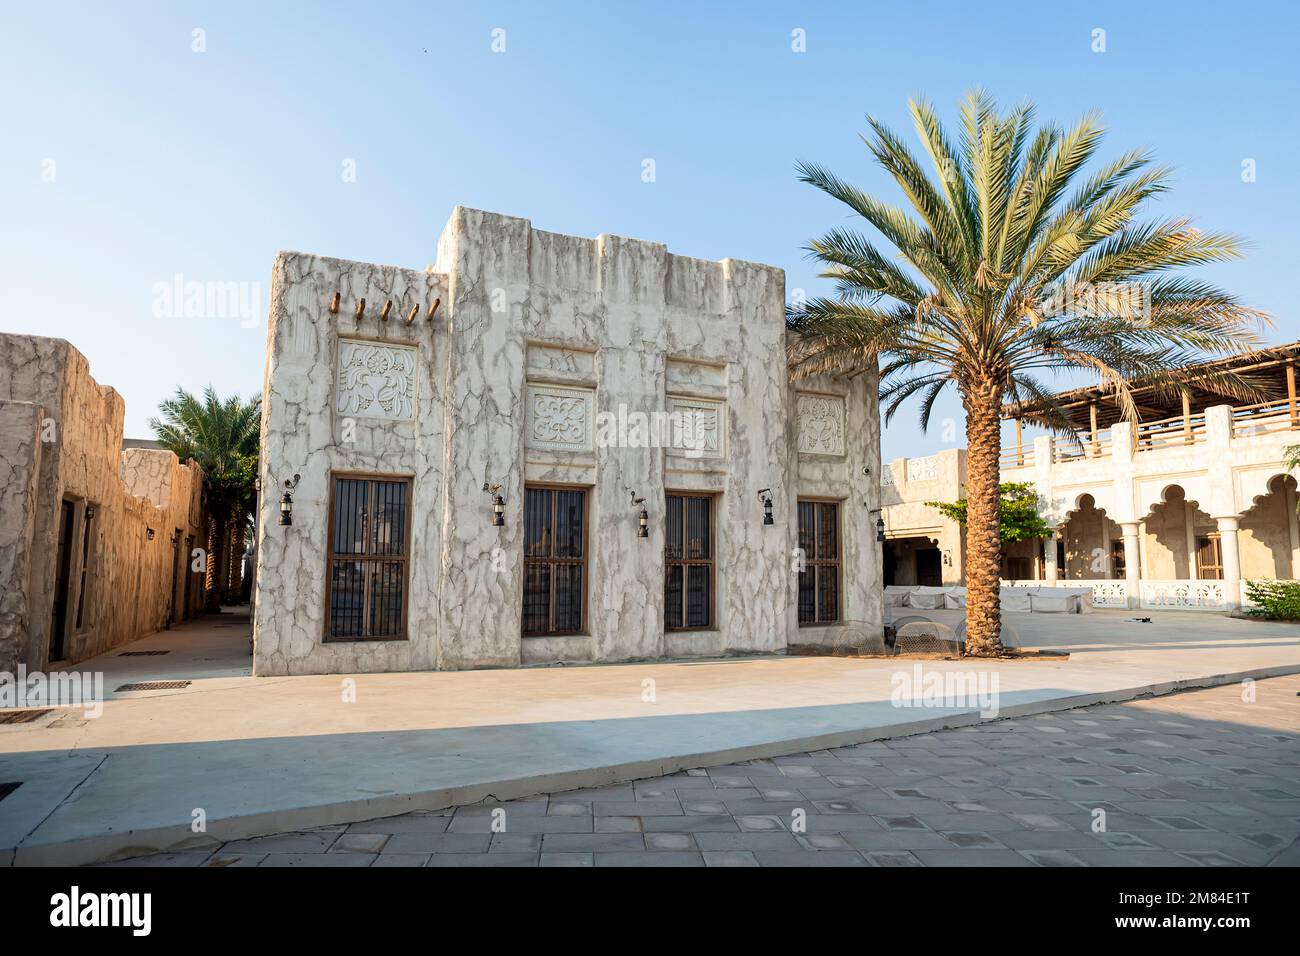 Beautiful and spectacular scenery of traditional Arabic architecture with human-made houses and structures during a sunny day. Stock Photo